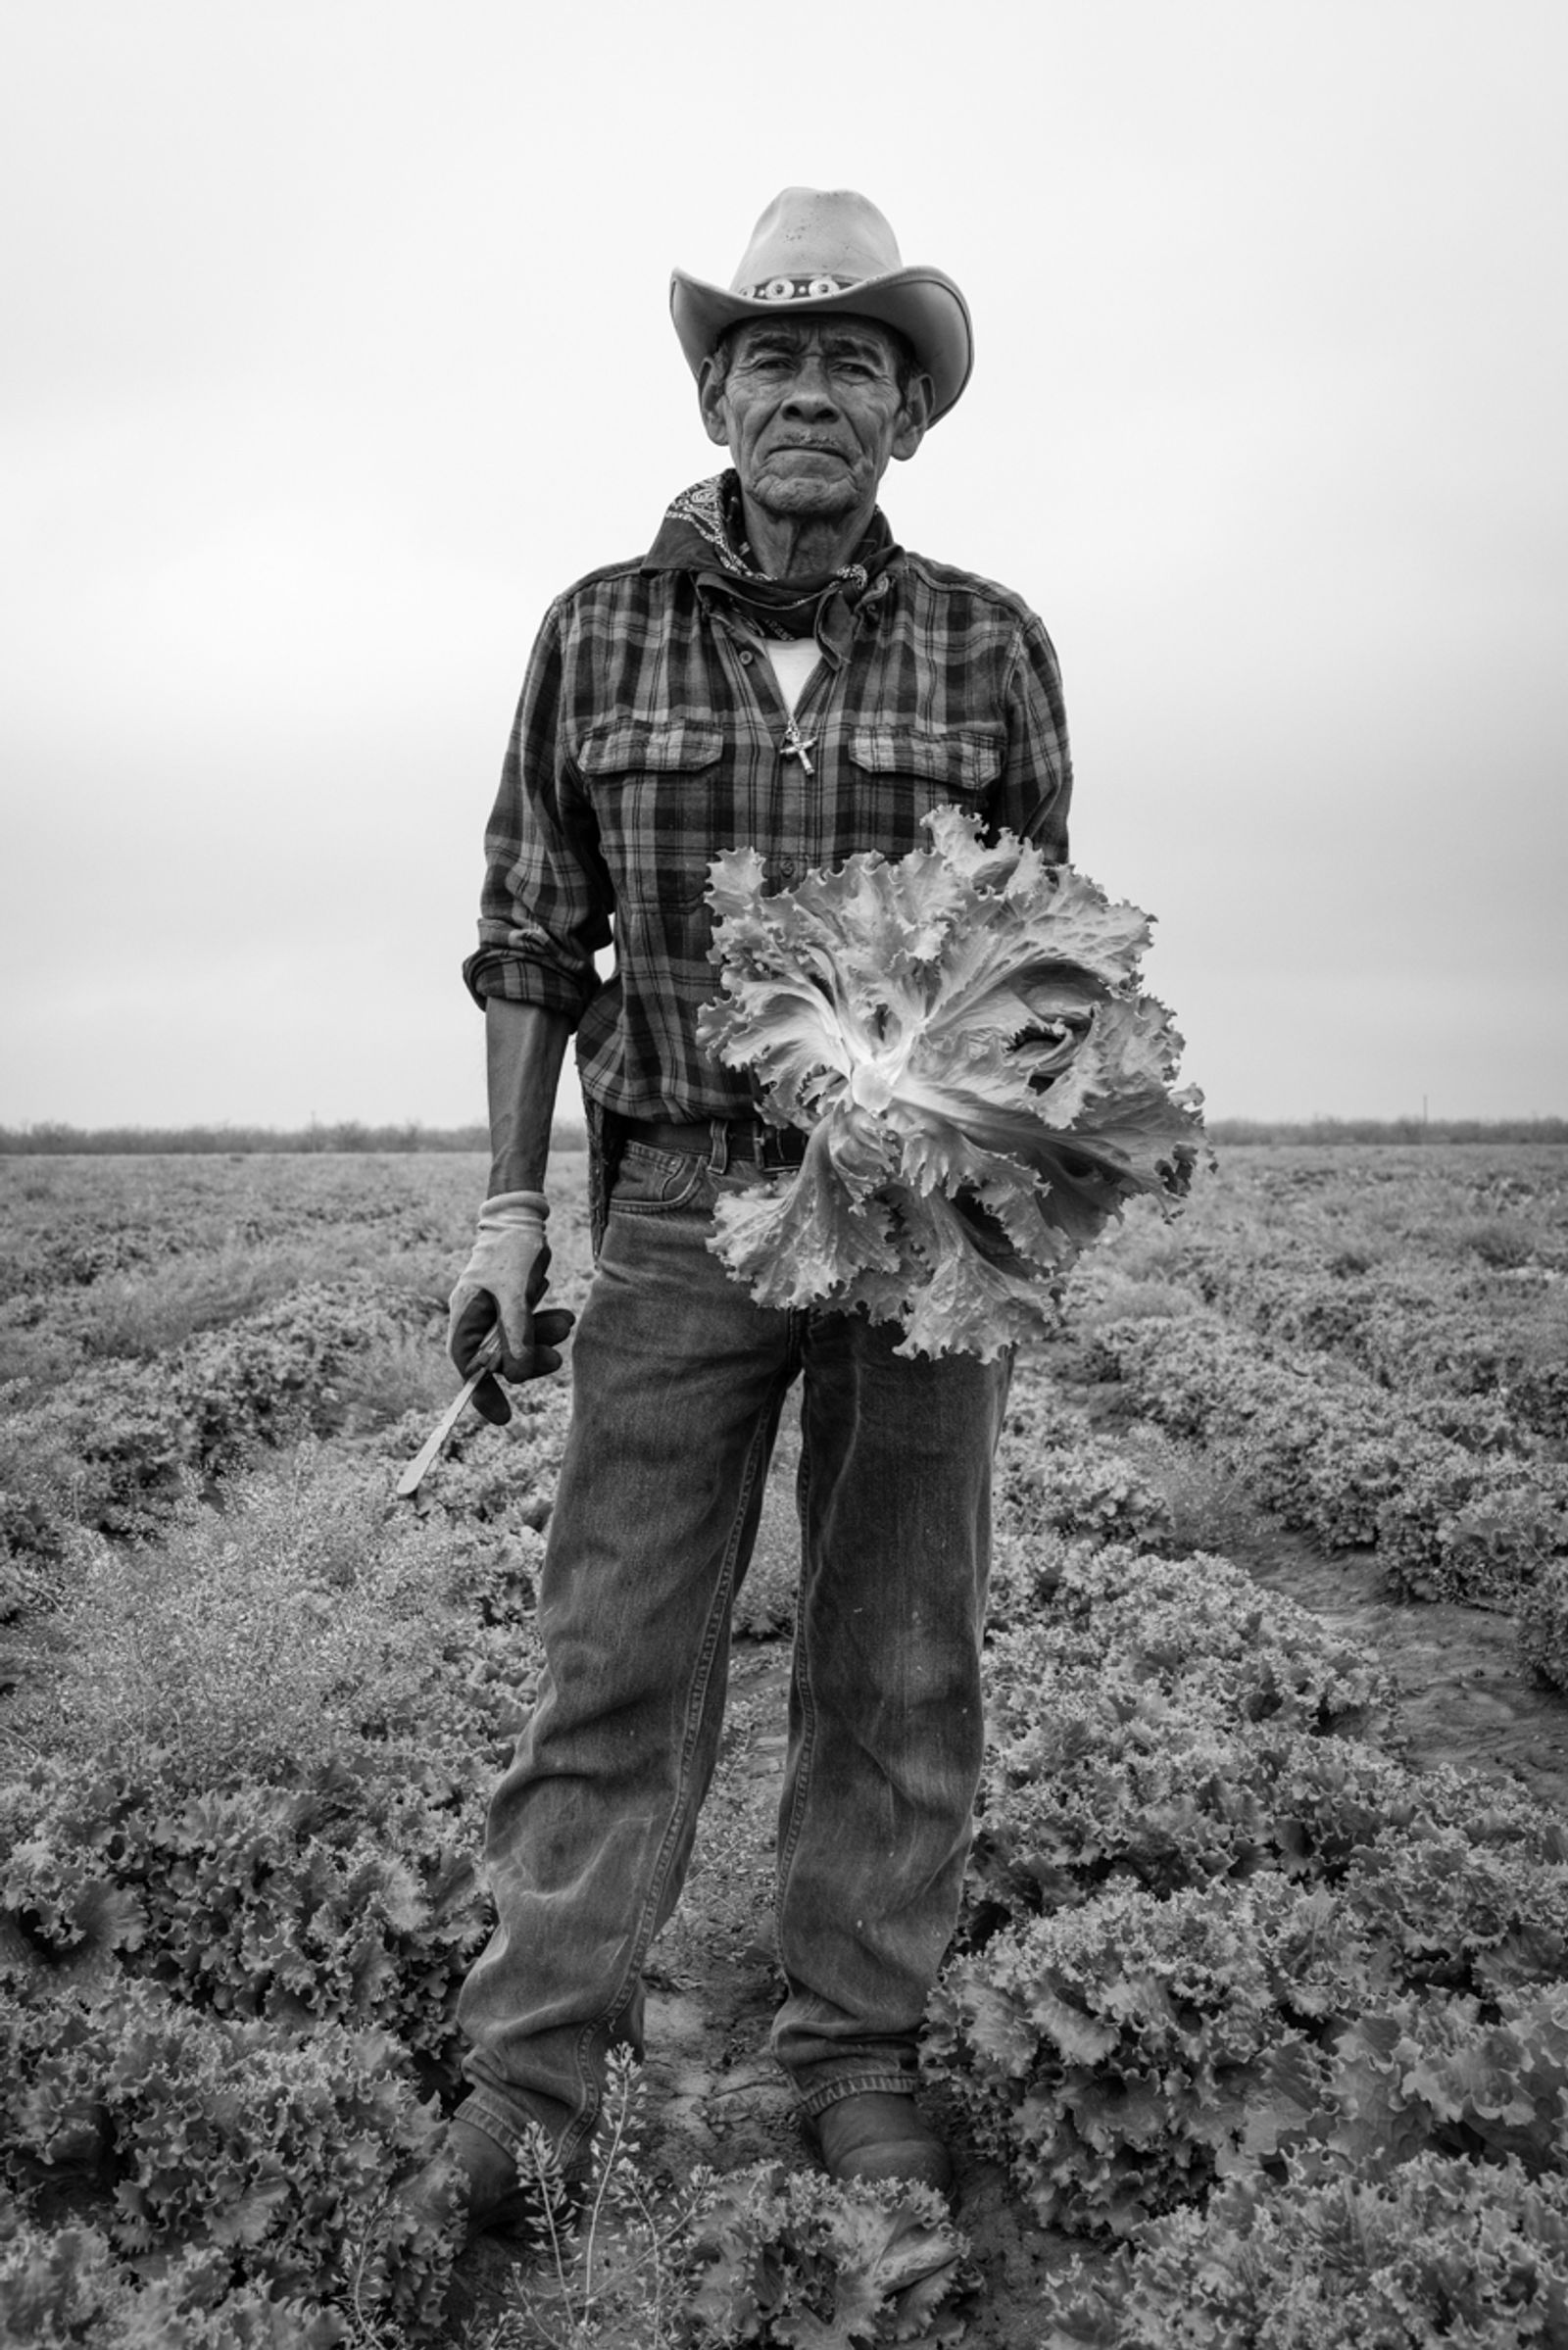 © Richard Sharum - Migrant Worker With Cabbage and Tool. Pearsall, Texas. 03.24.2021